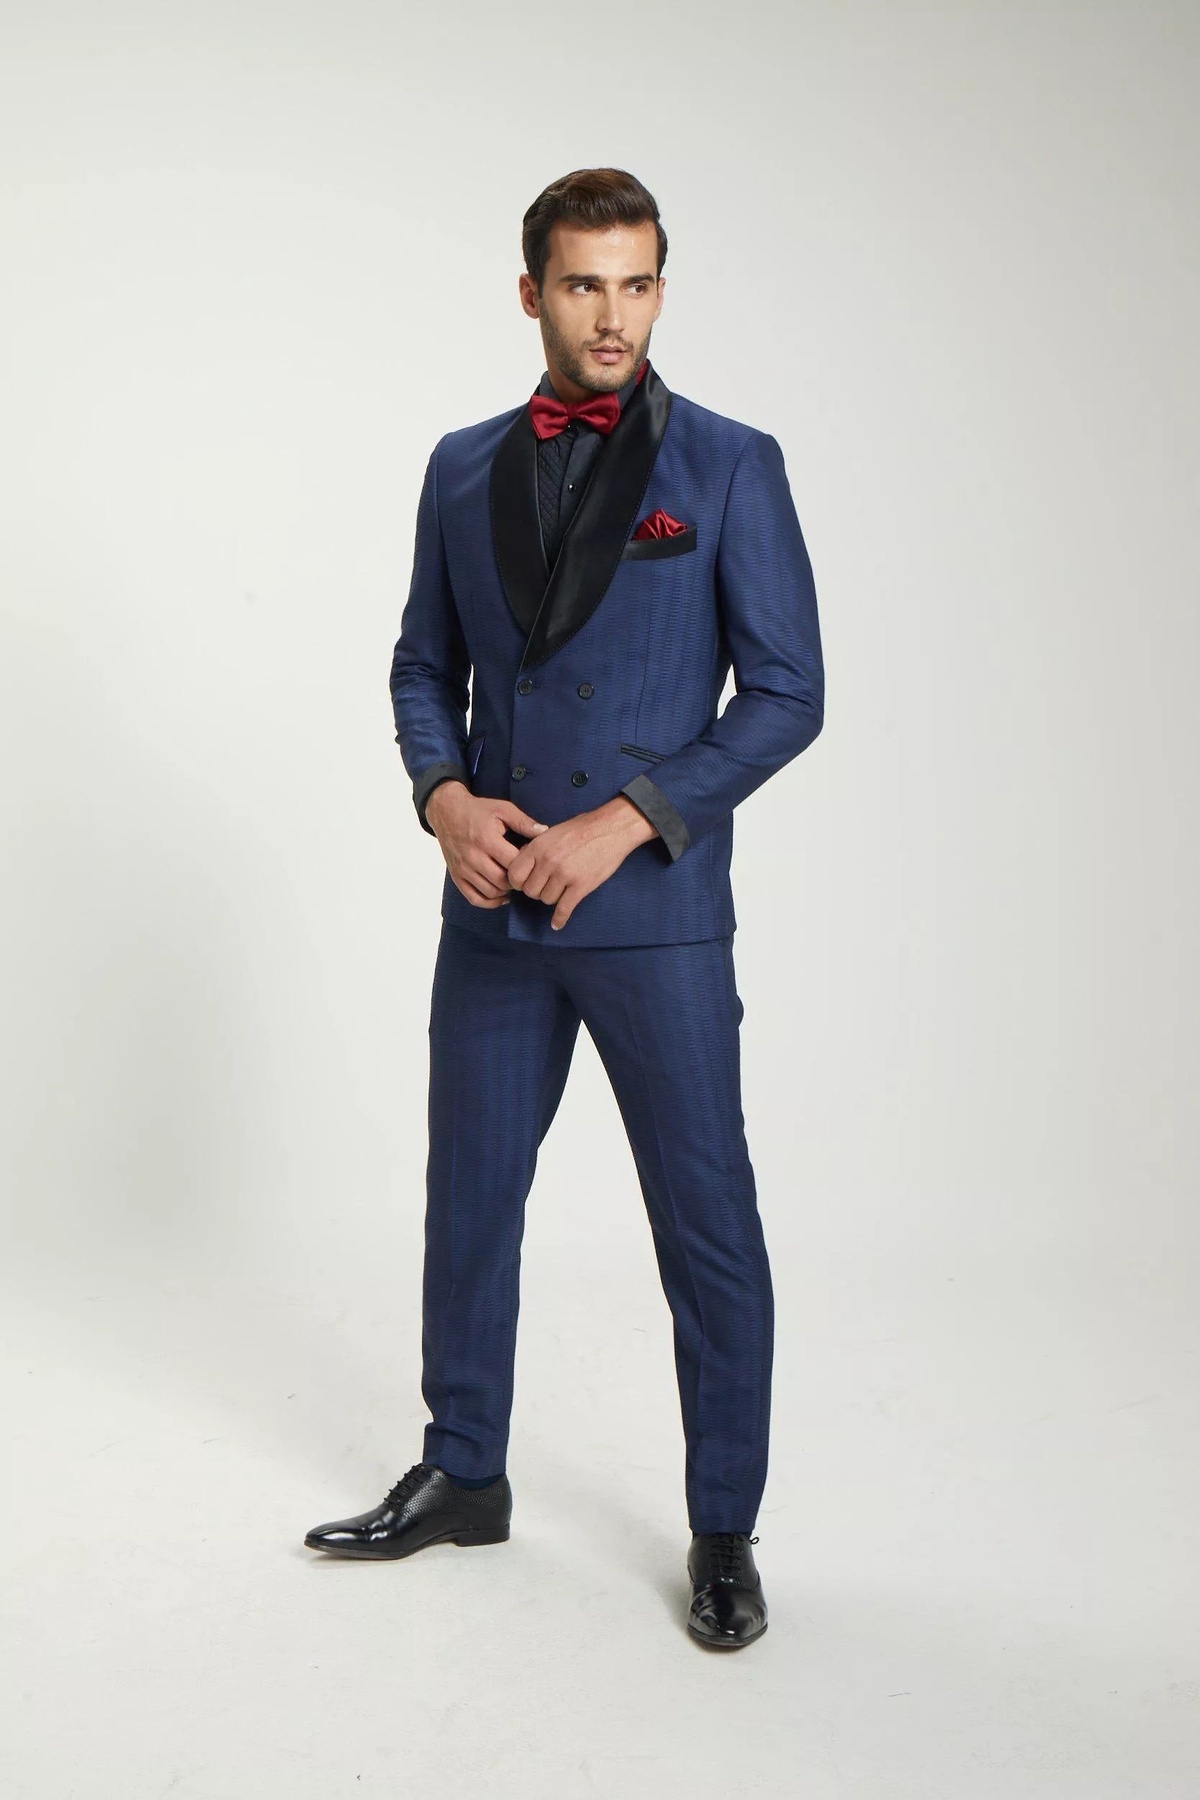 The Timeless Elegance of a Well-Tailored Designer Suit for Men